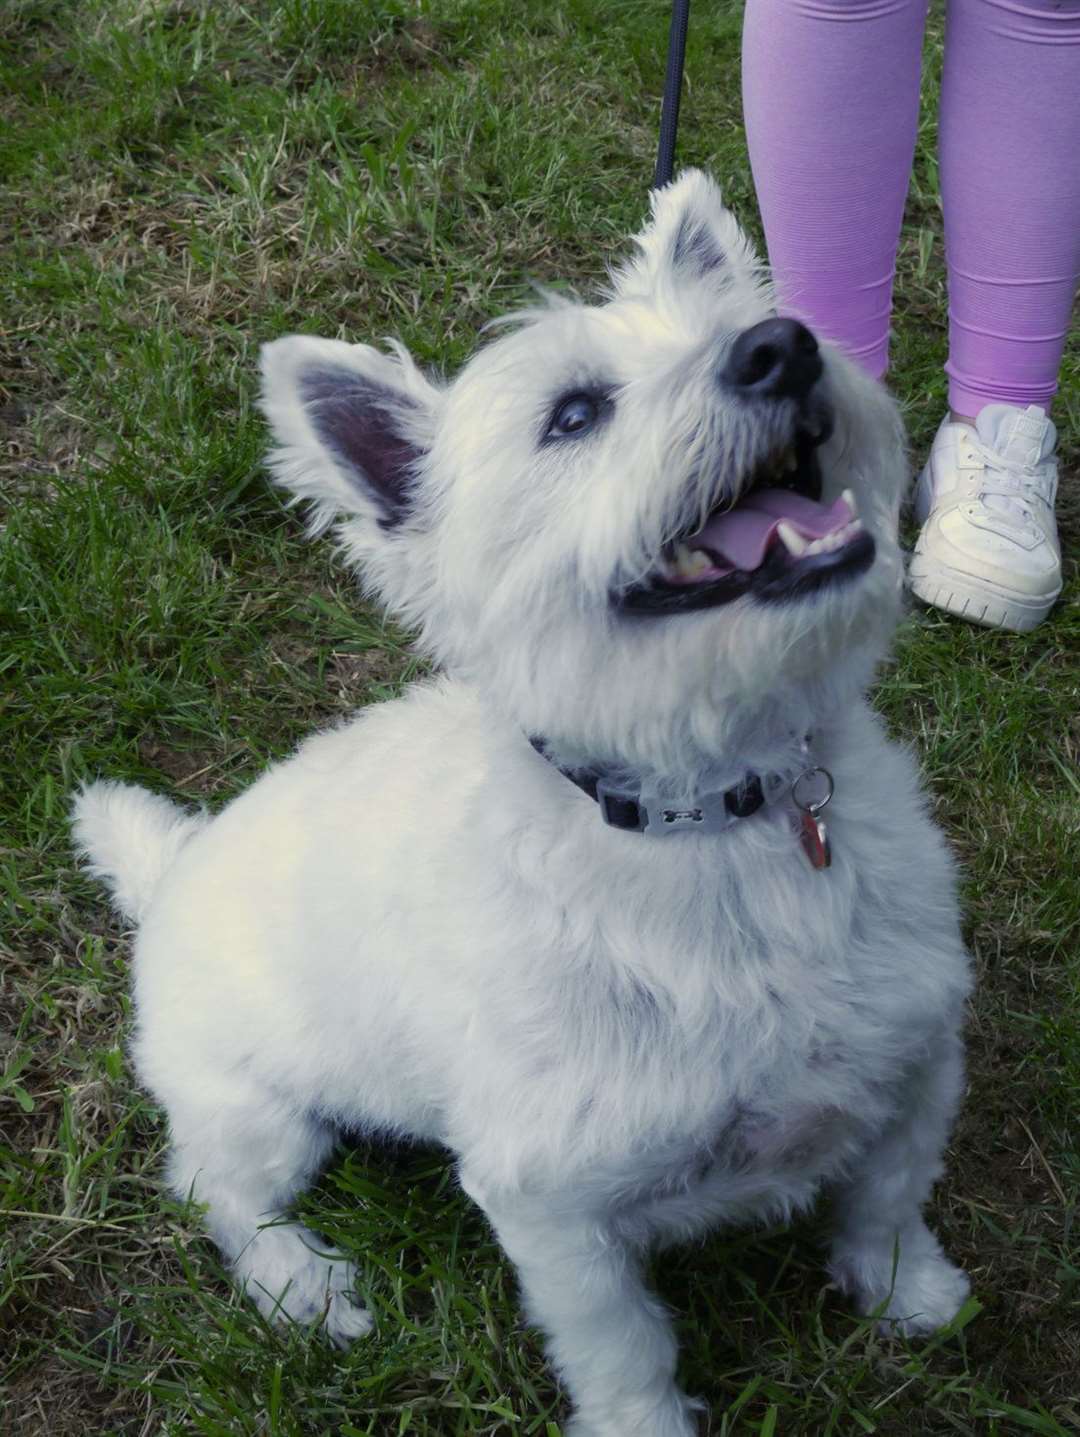 Best rescue winner Archie, a five-year-old West Highland Terrier, owned by Brenda.